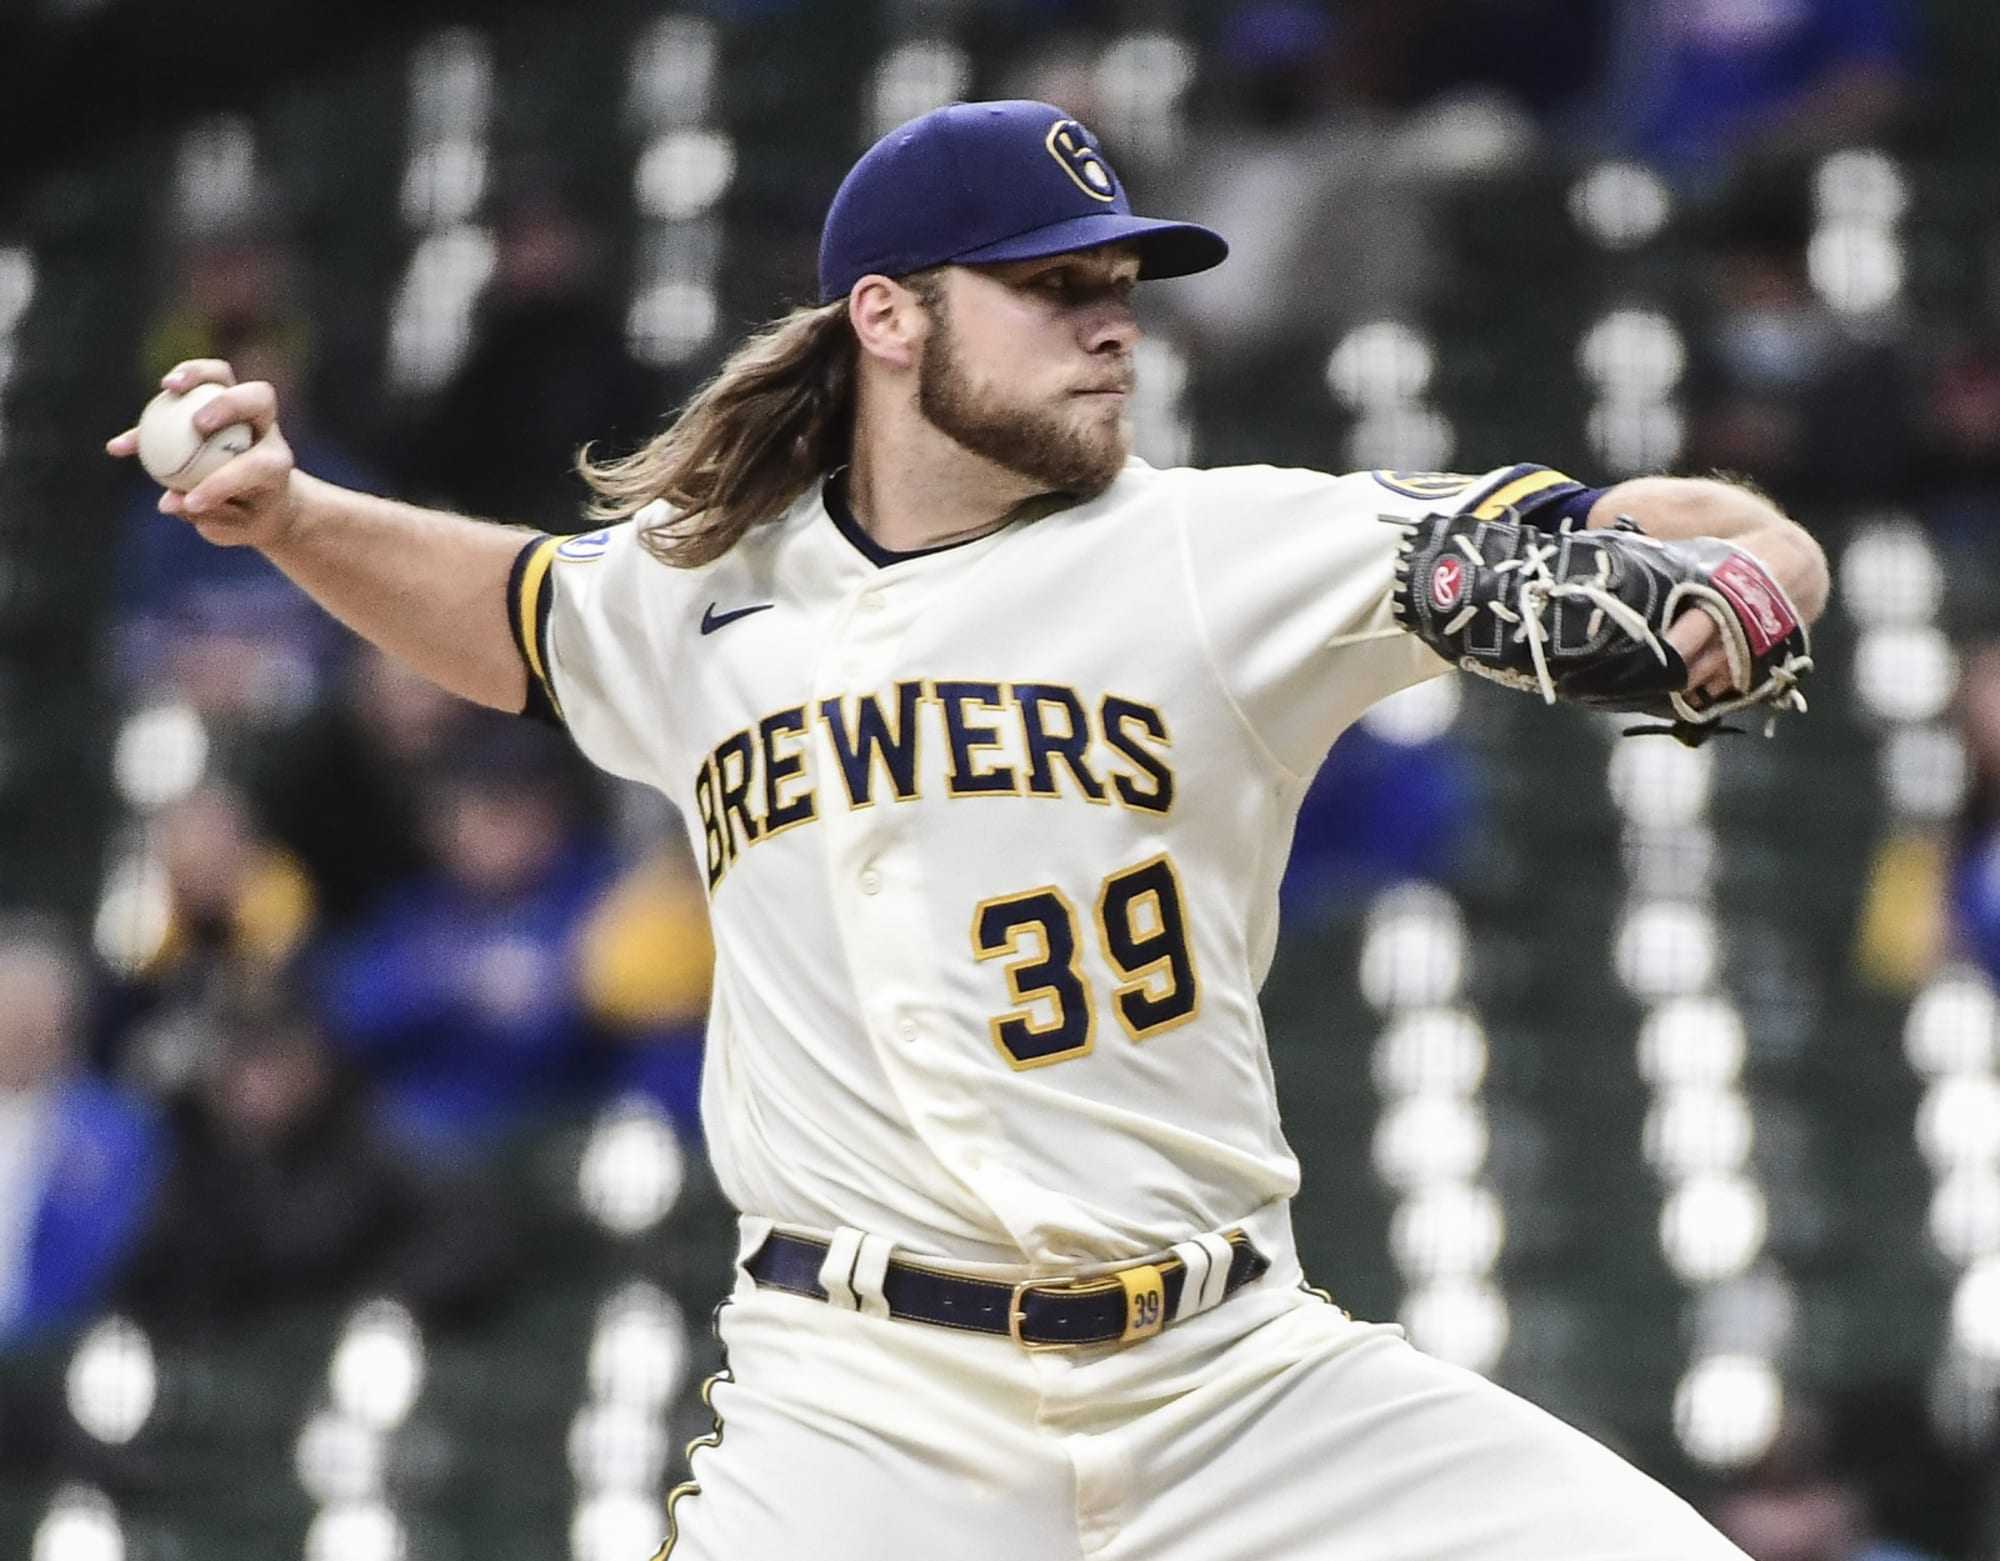 NEW CORBIN BURNES FINEST 99 IS THE BEST PITCHER IN THE GAME 